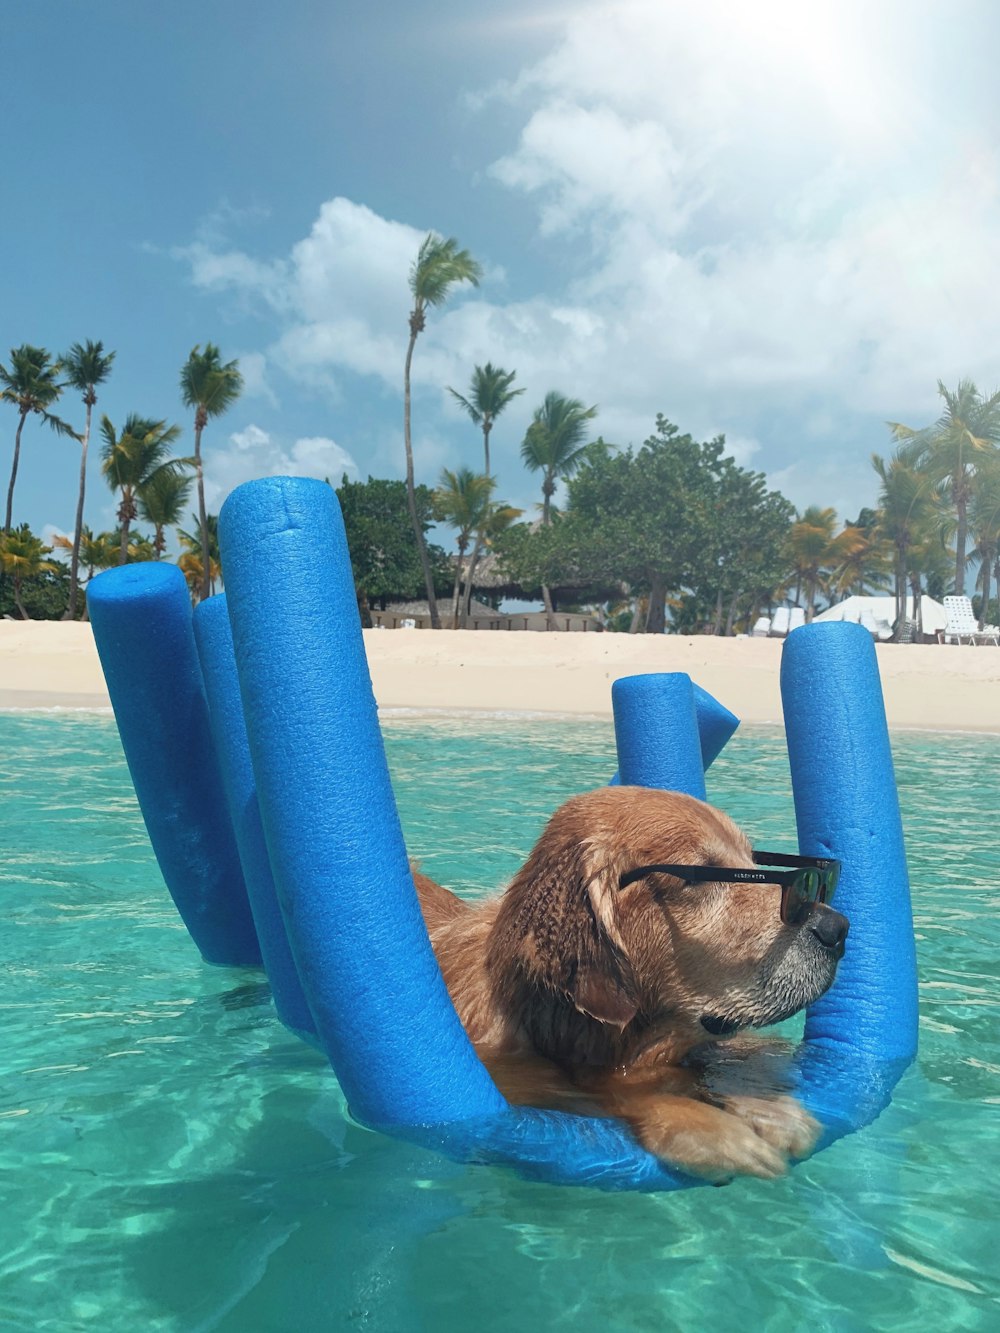 brown short coated dog in blue inflatable pool during daytime